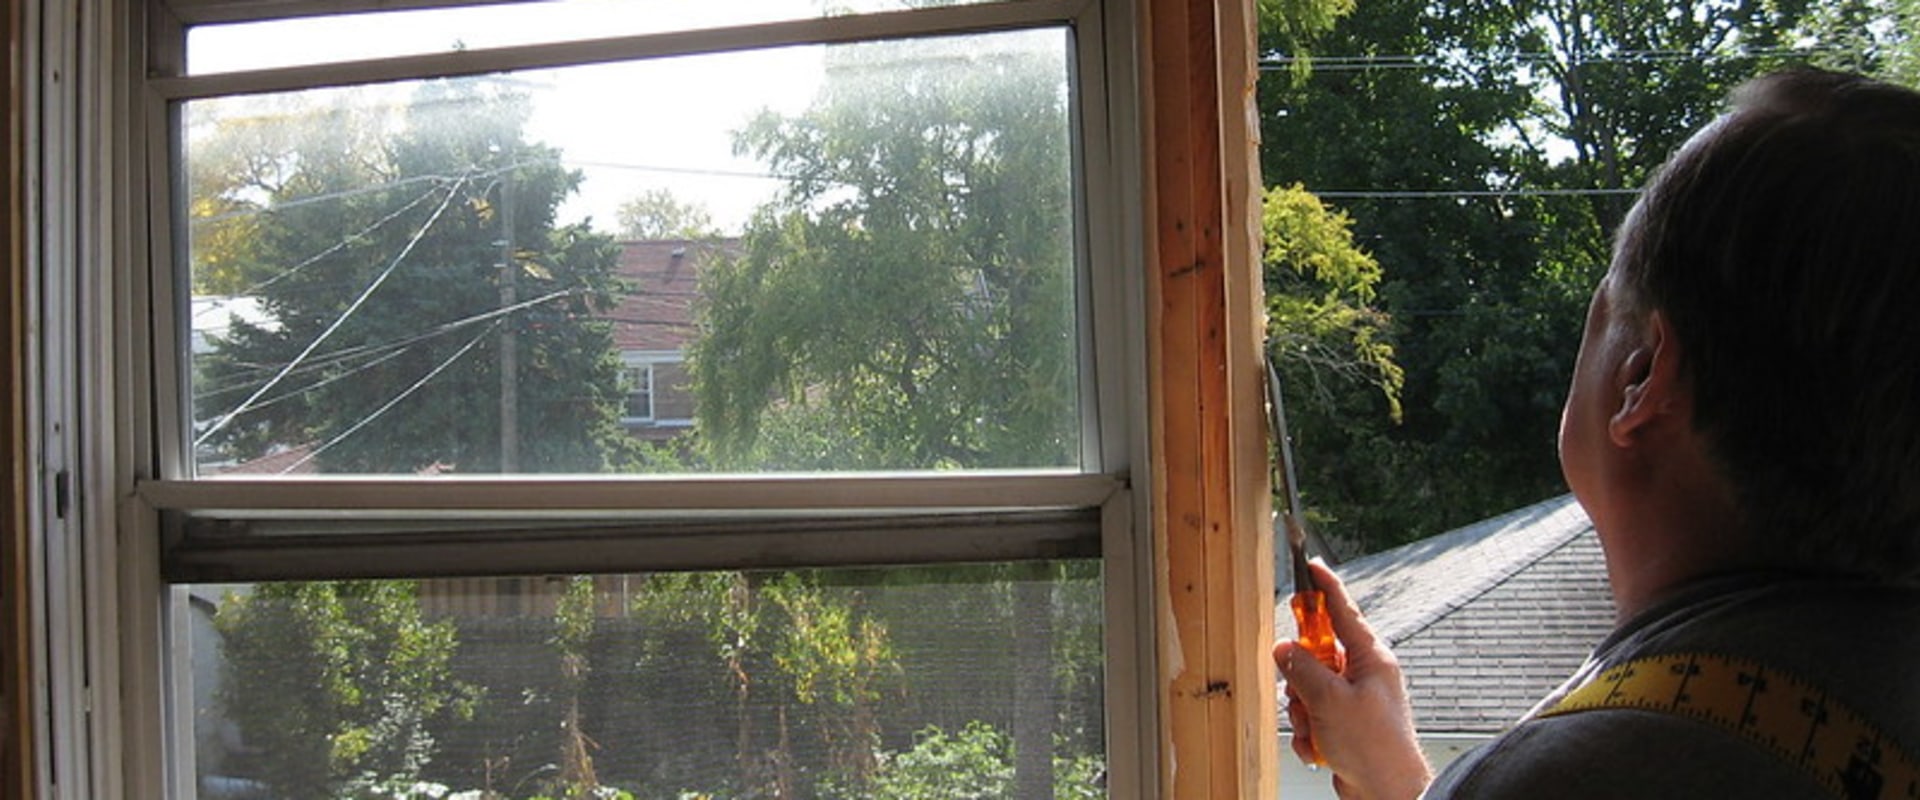 Why Double Glazed Windows Are The Best Choice For Home Window Replacement In Melbourne